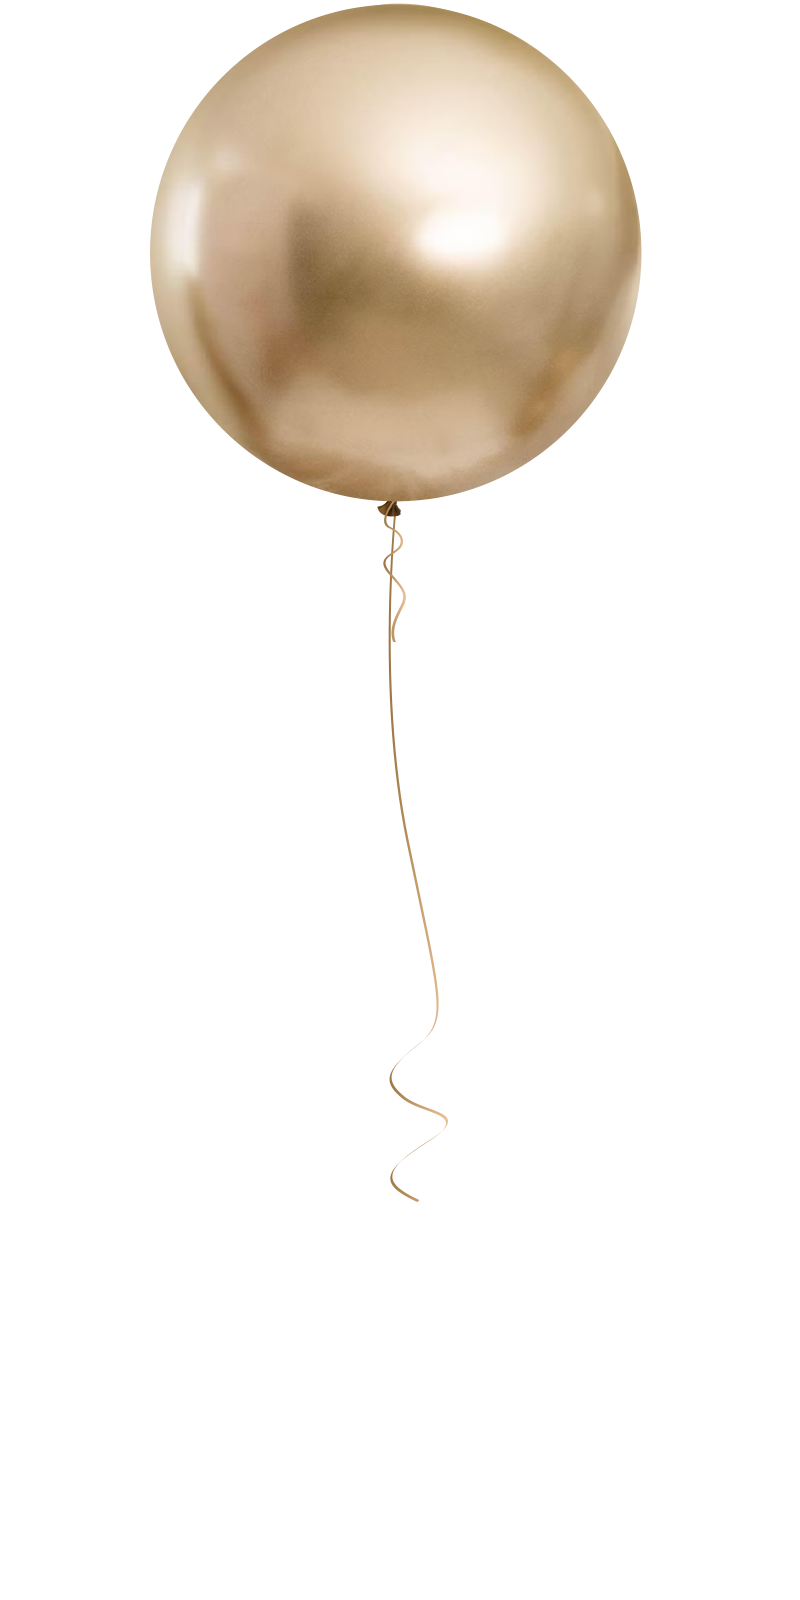 CCH302_loose_balloon_17inch_1a